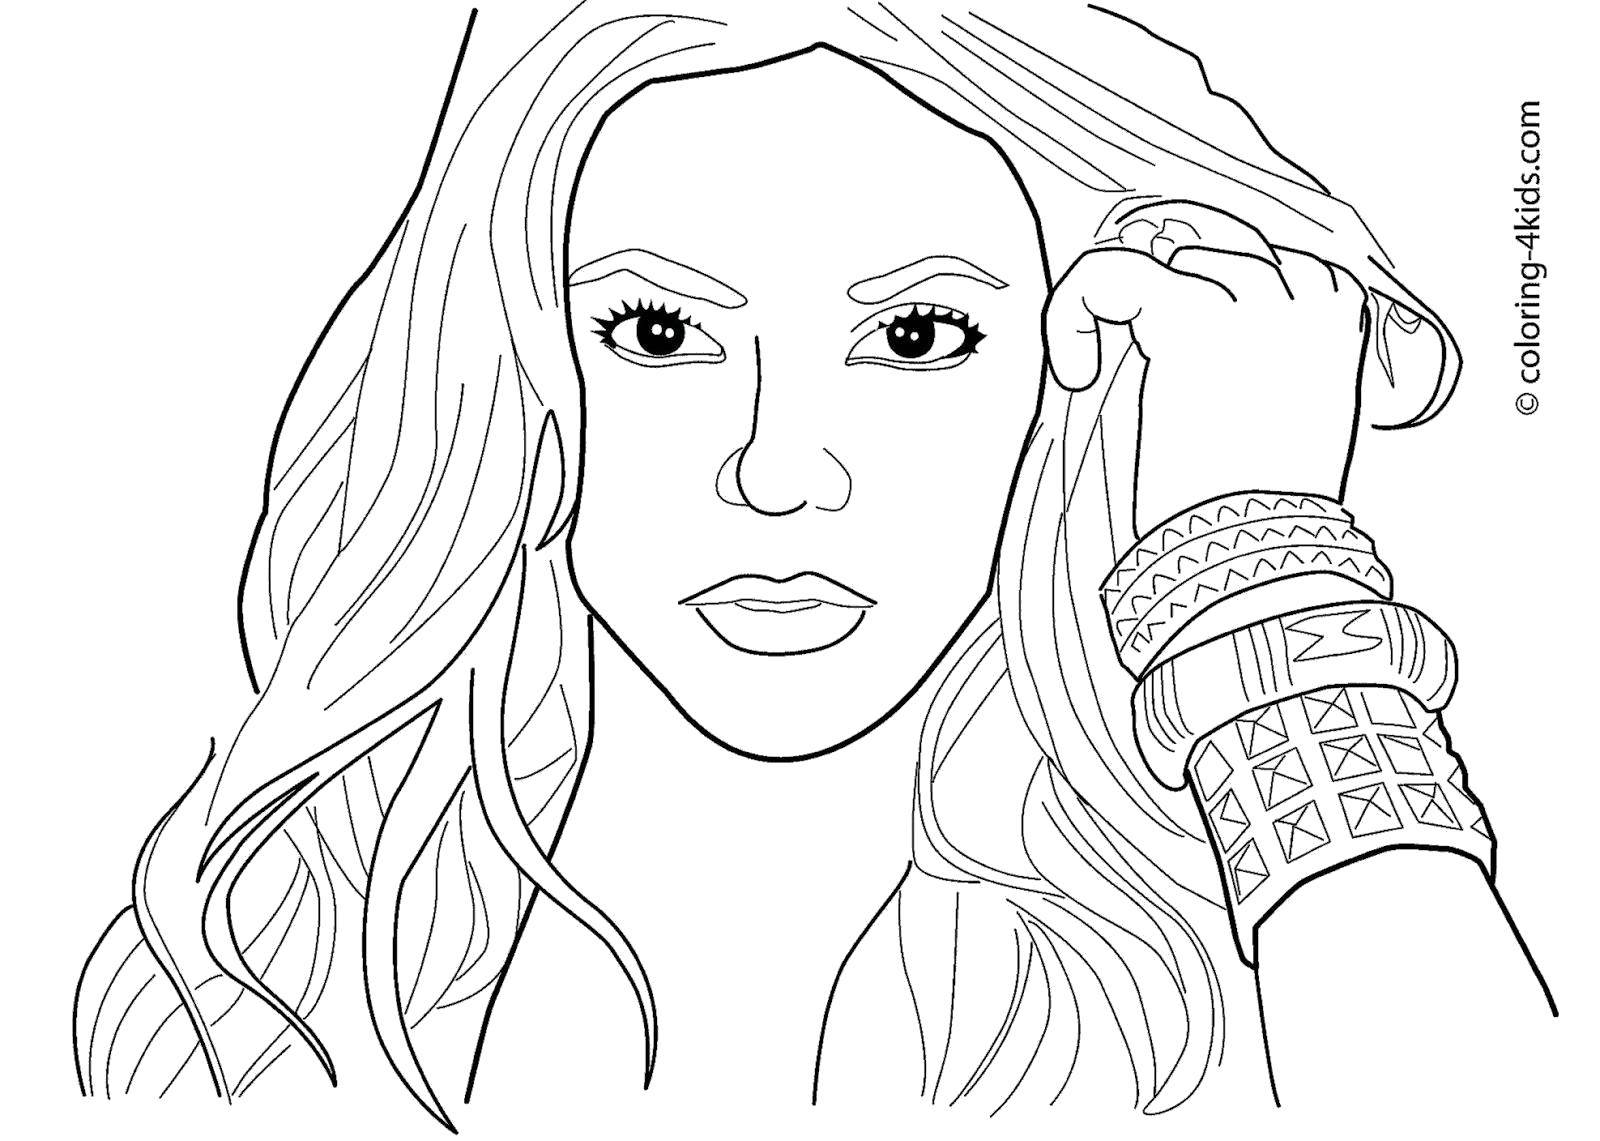 Coloring Shakira. Category coloring. Tags:  Celebrity.